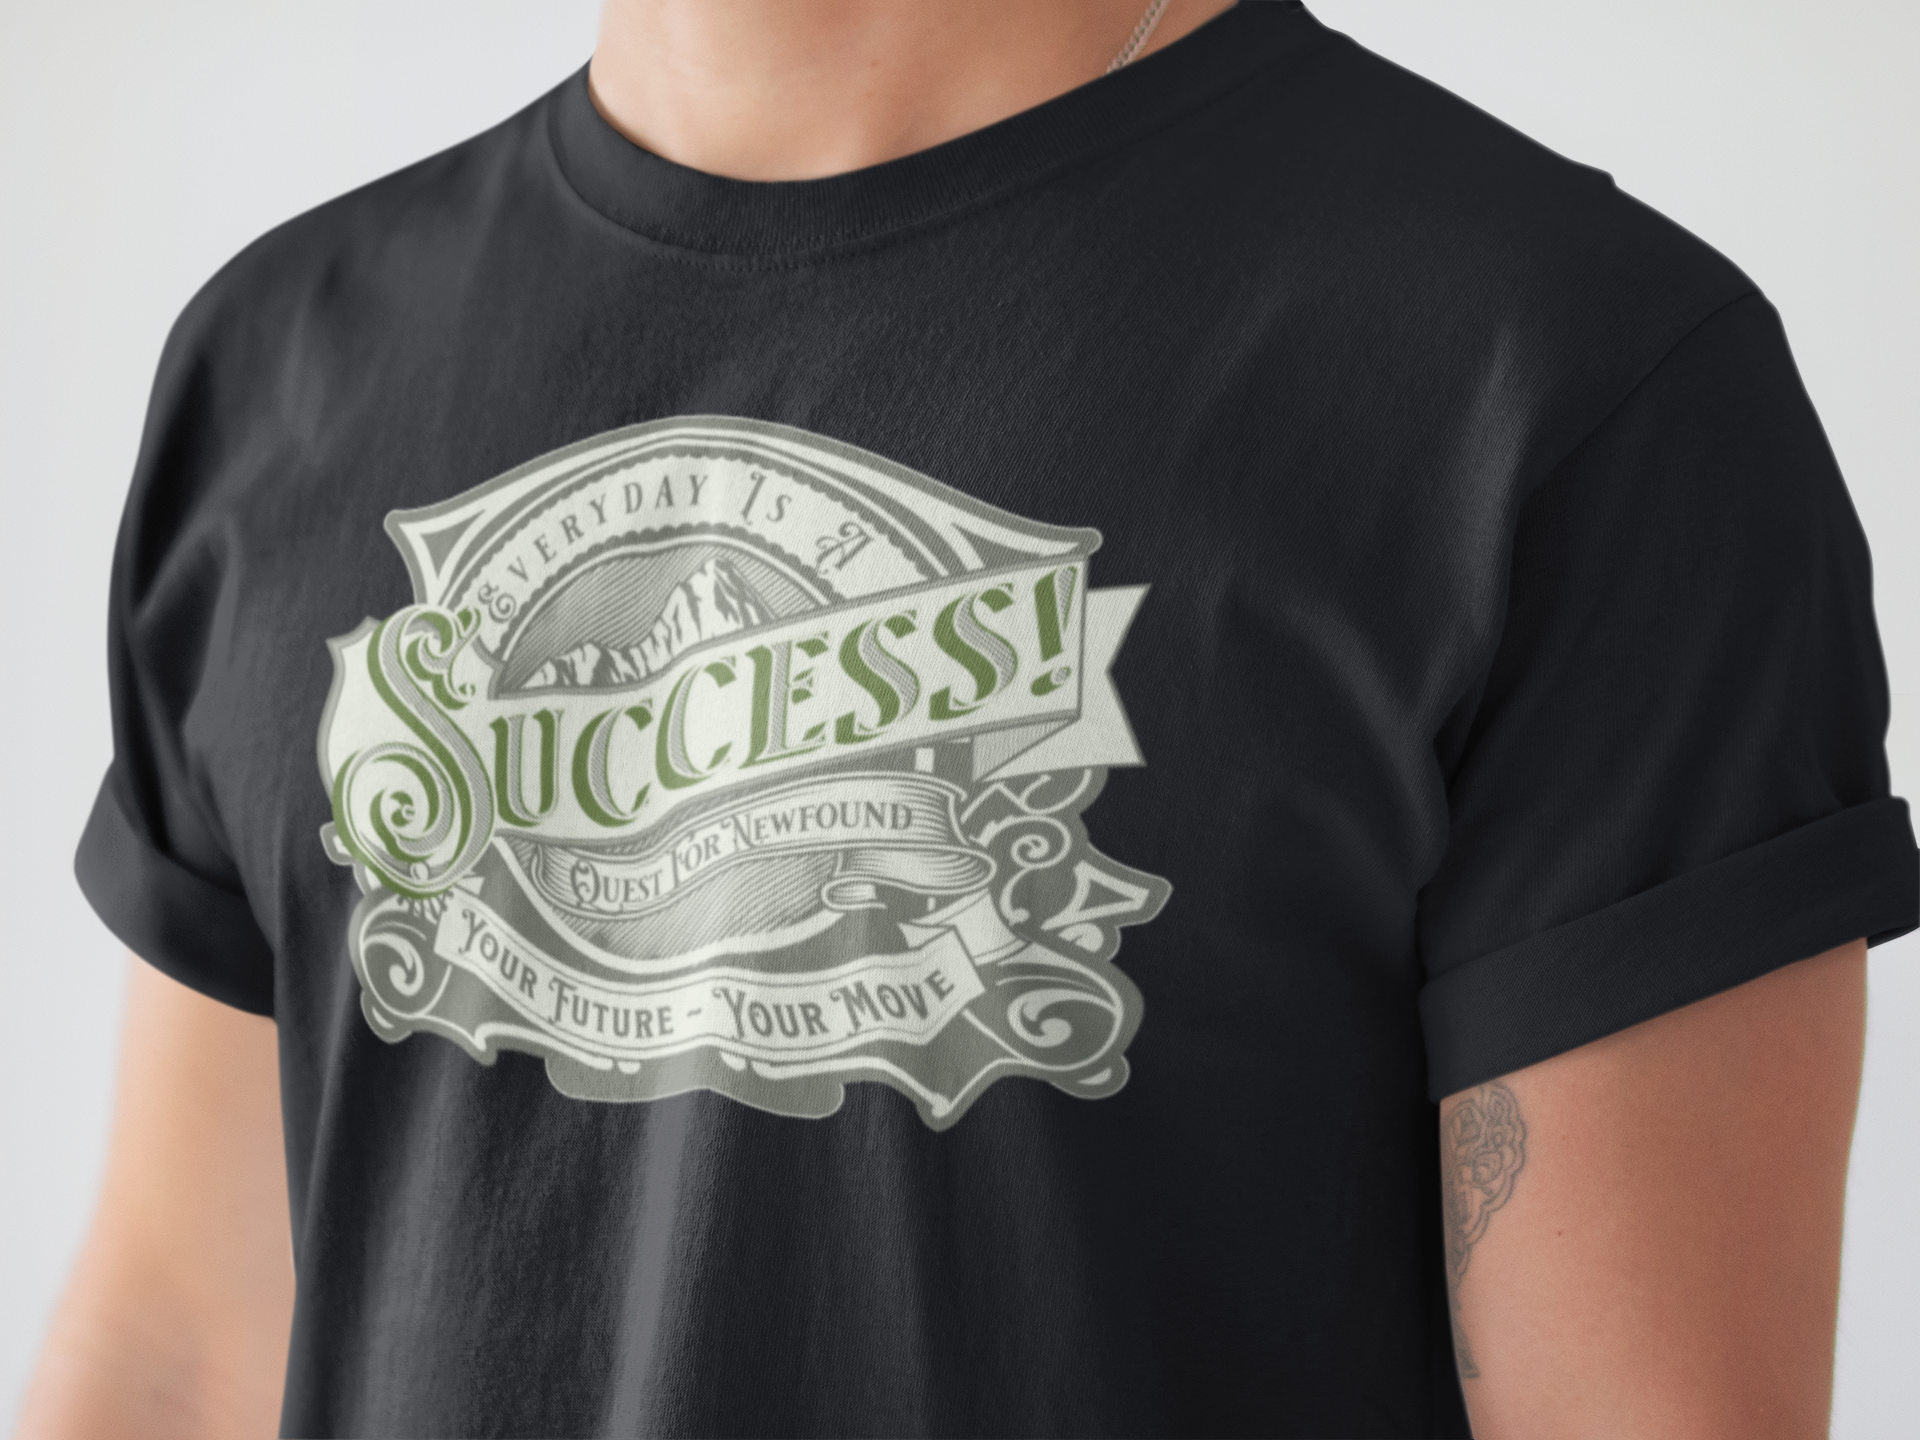 Everyday Is A Quest For Newfound Success! ~ Super-comfortable, Unisex Short Sleeve T shirt With Add-A-Tude